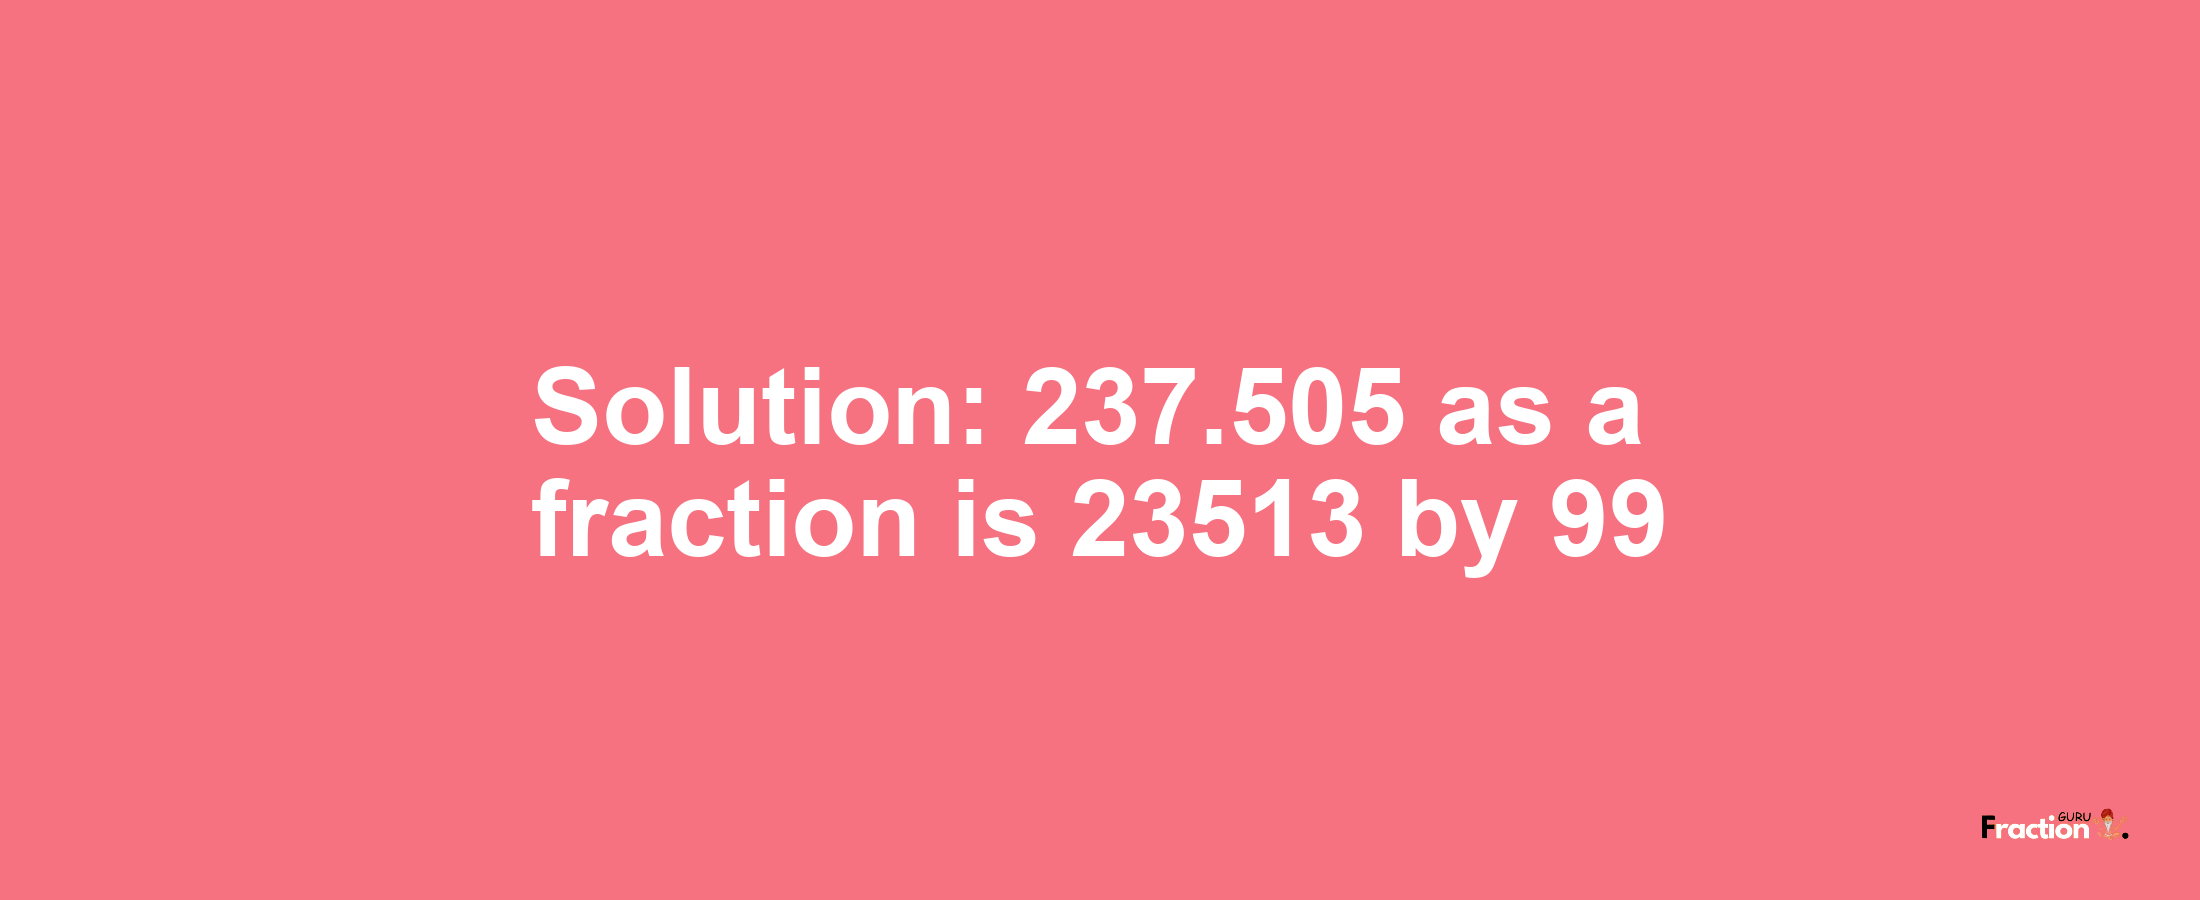 Solution:237.505 as a fraction is 23513/99